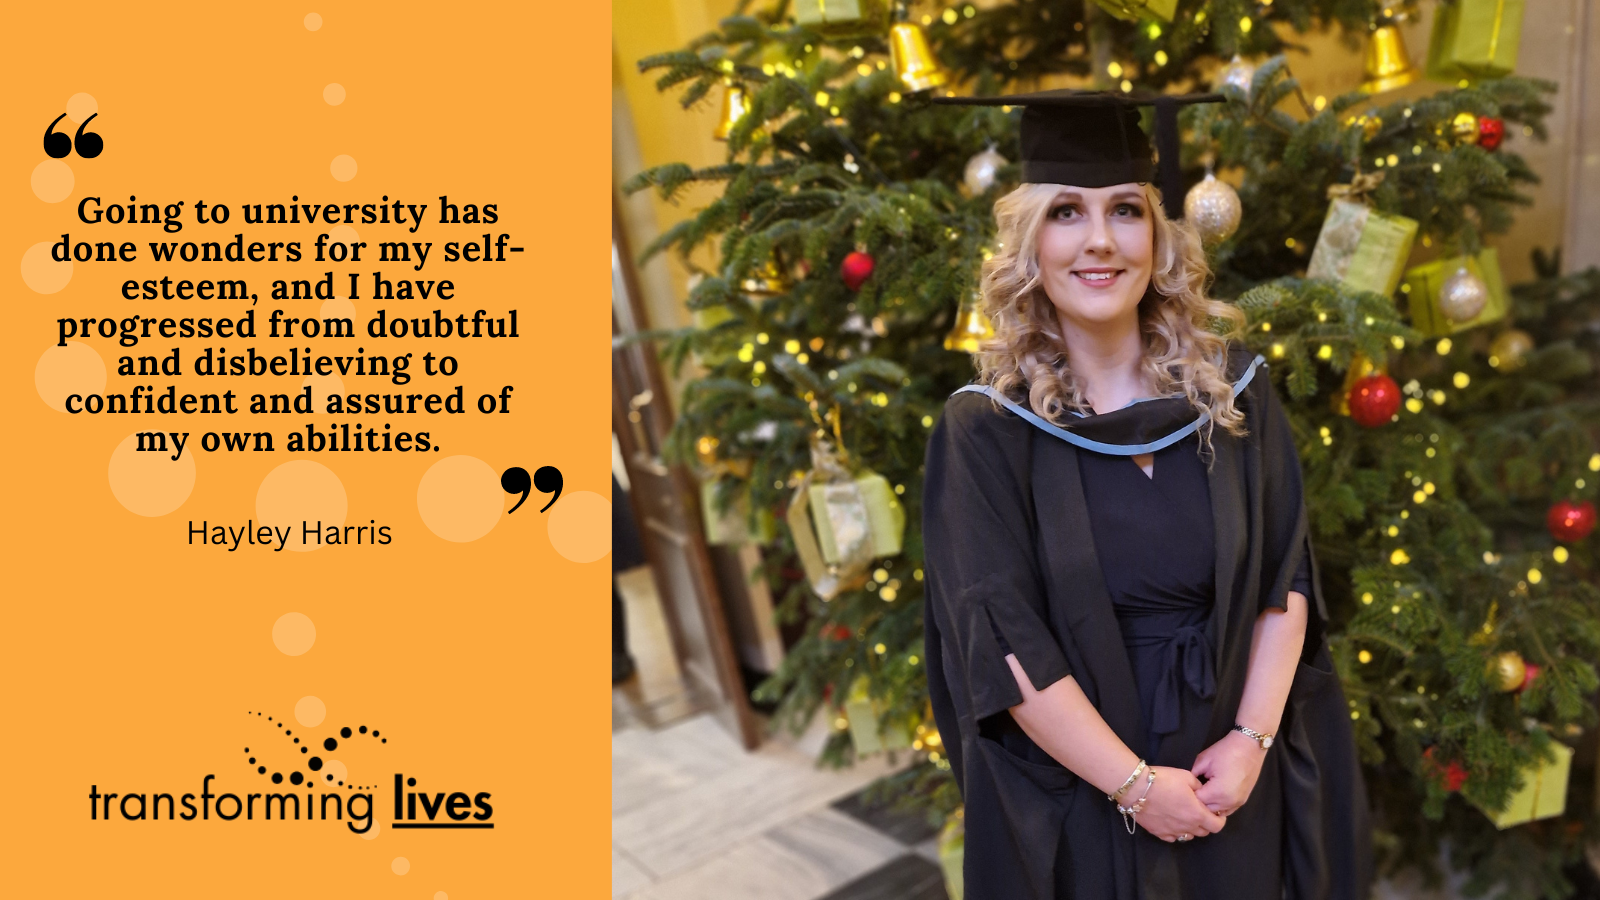 "Going to university has done wonders for my self-esteem, and I have progressed from doubtful and disbelieving to confident and assured of my own abilities."